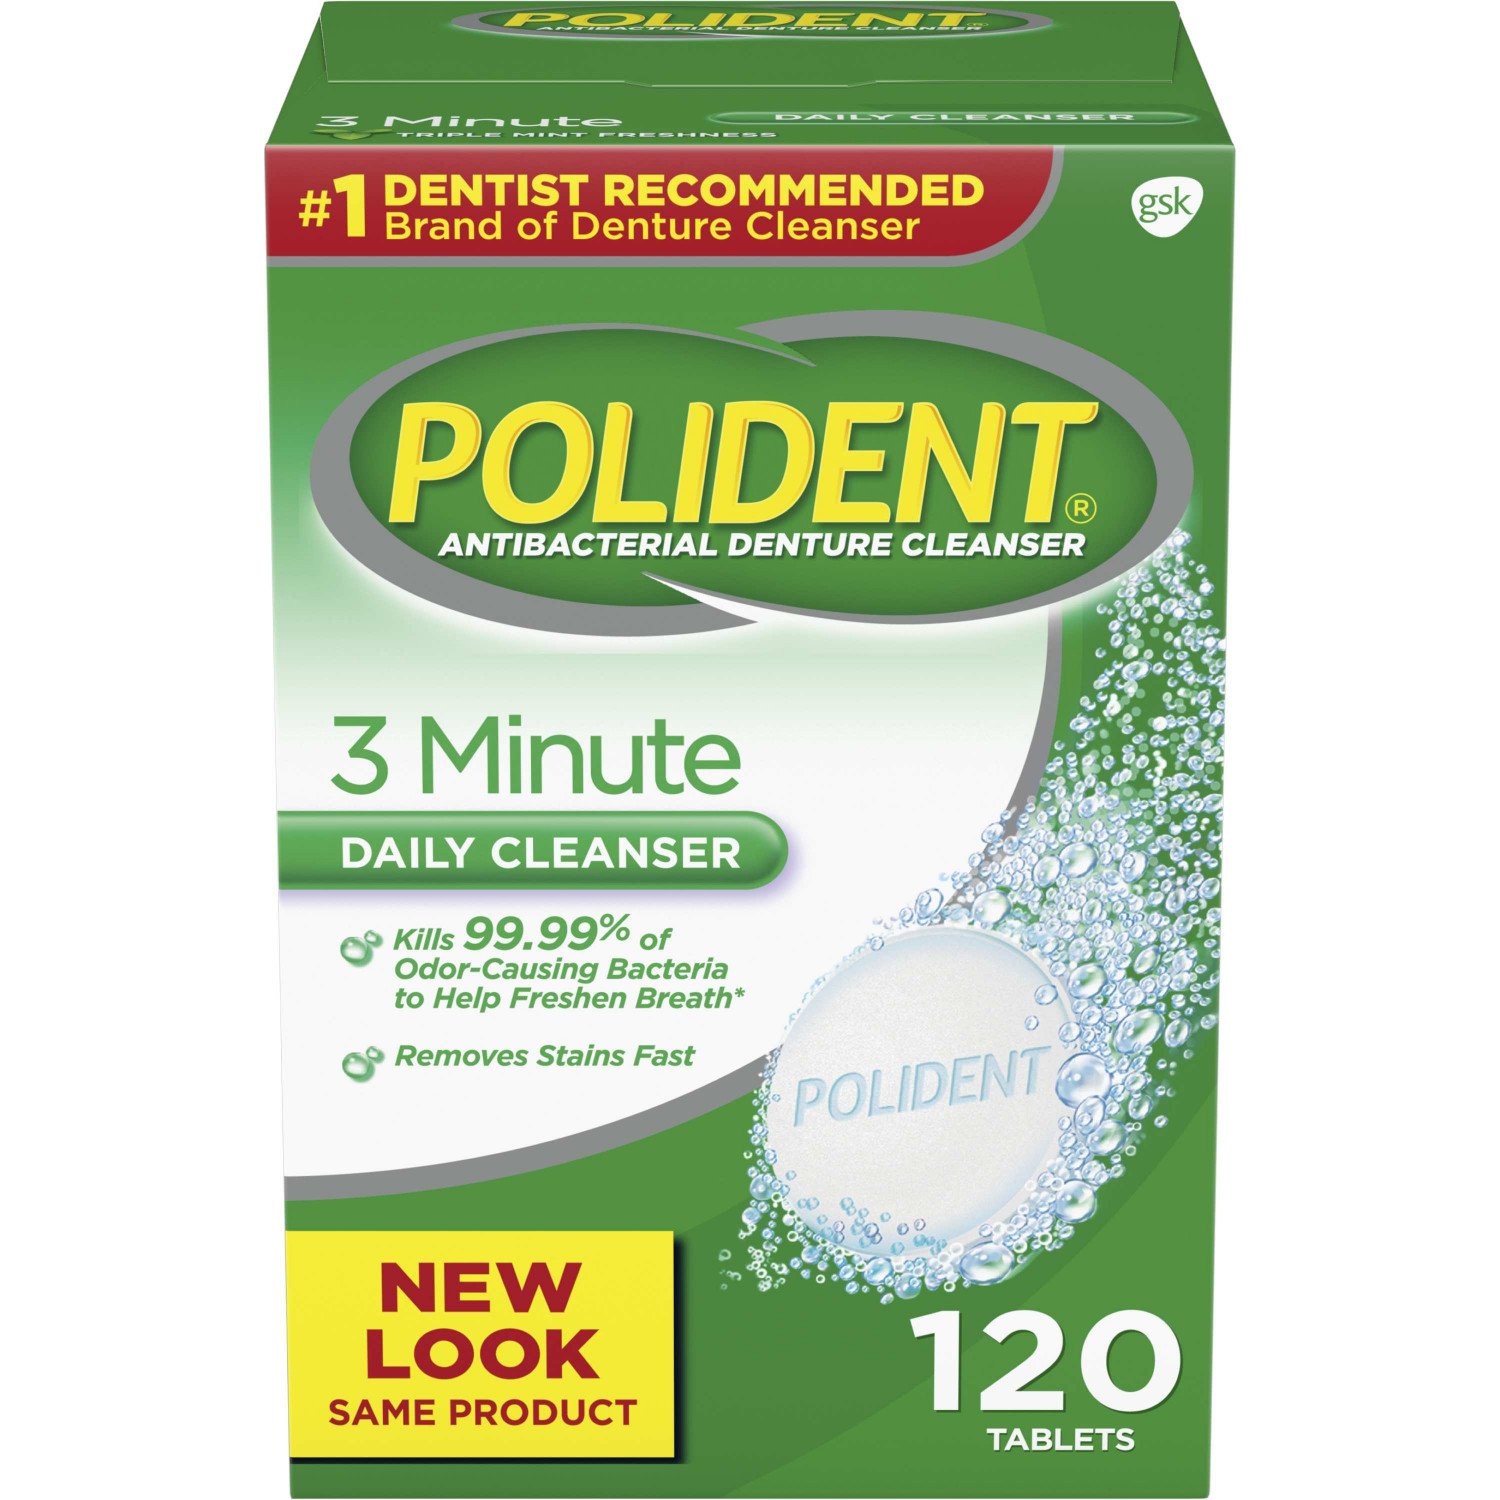 120-Ct Polident 3-Minute Antibacterial Denture Cleanser (Mint) $3.70 w/ S&S + Free Shipping w/ Prime or on $25+